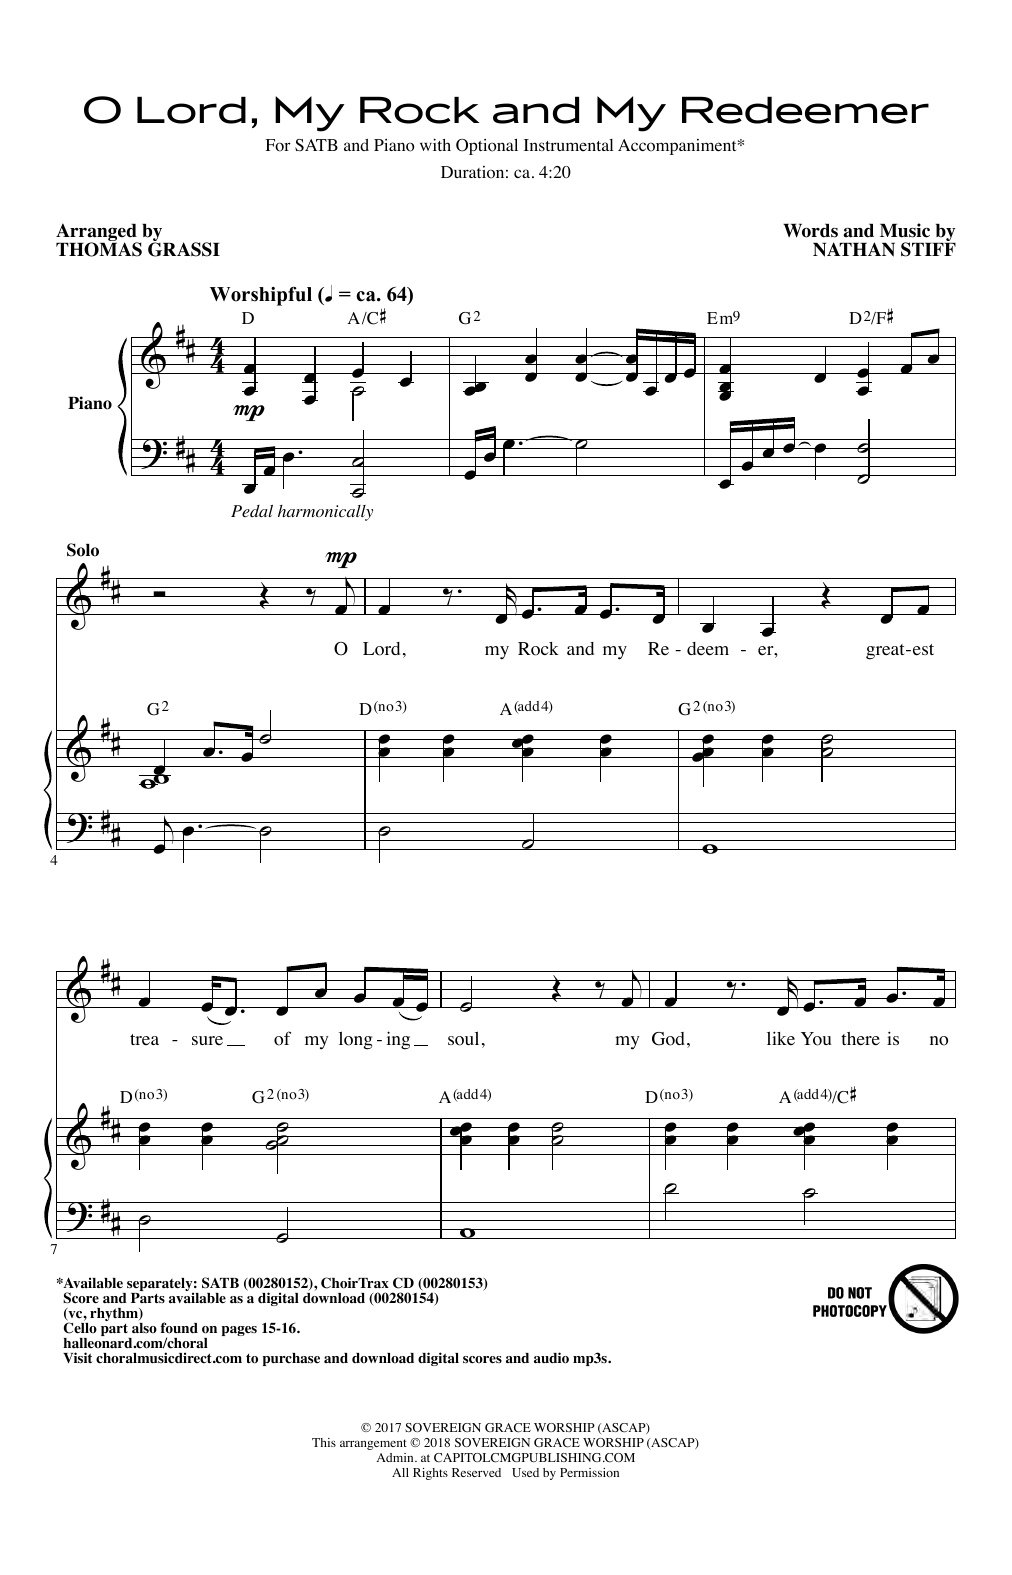 Download Thomas Grassi O Lord, My Rock And My Redeemer Sheet Music